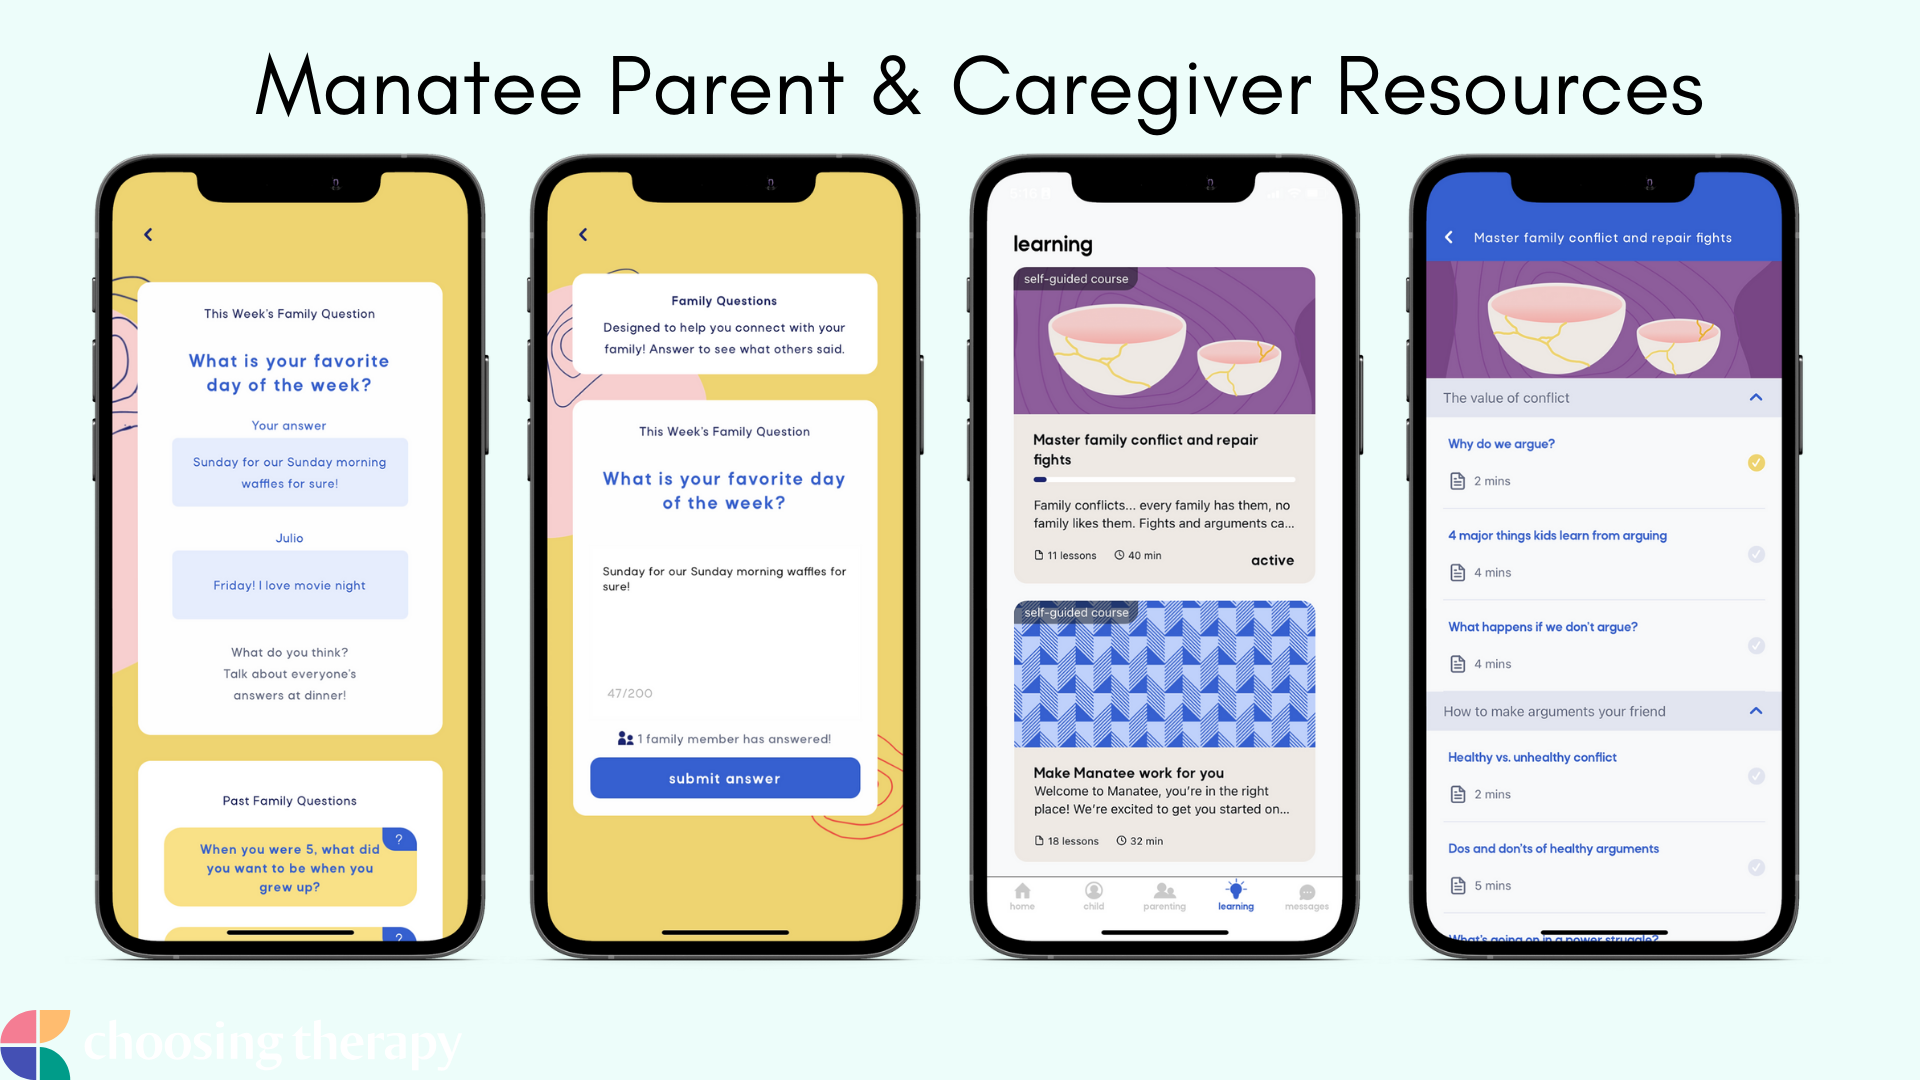 Image of the free parent & caregiver resources in the Manatee app